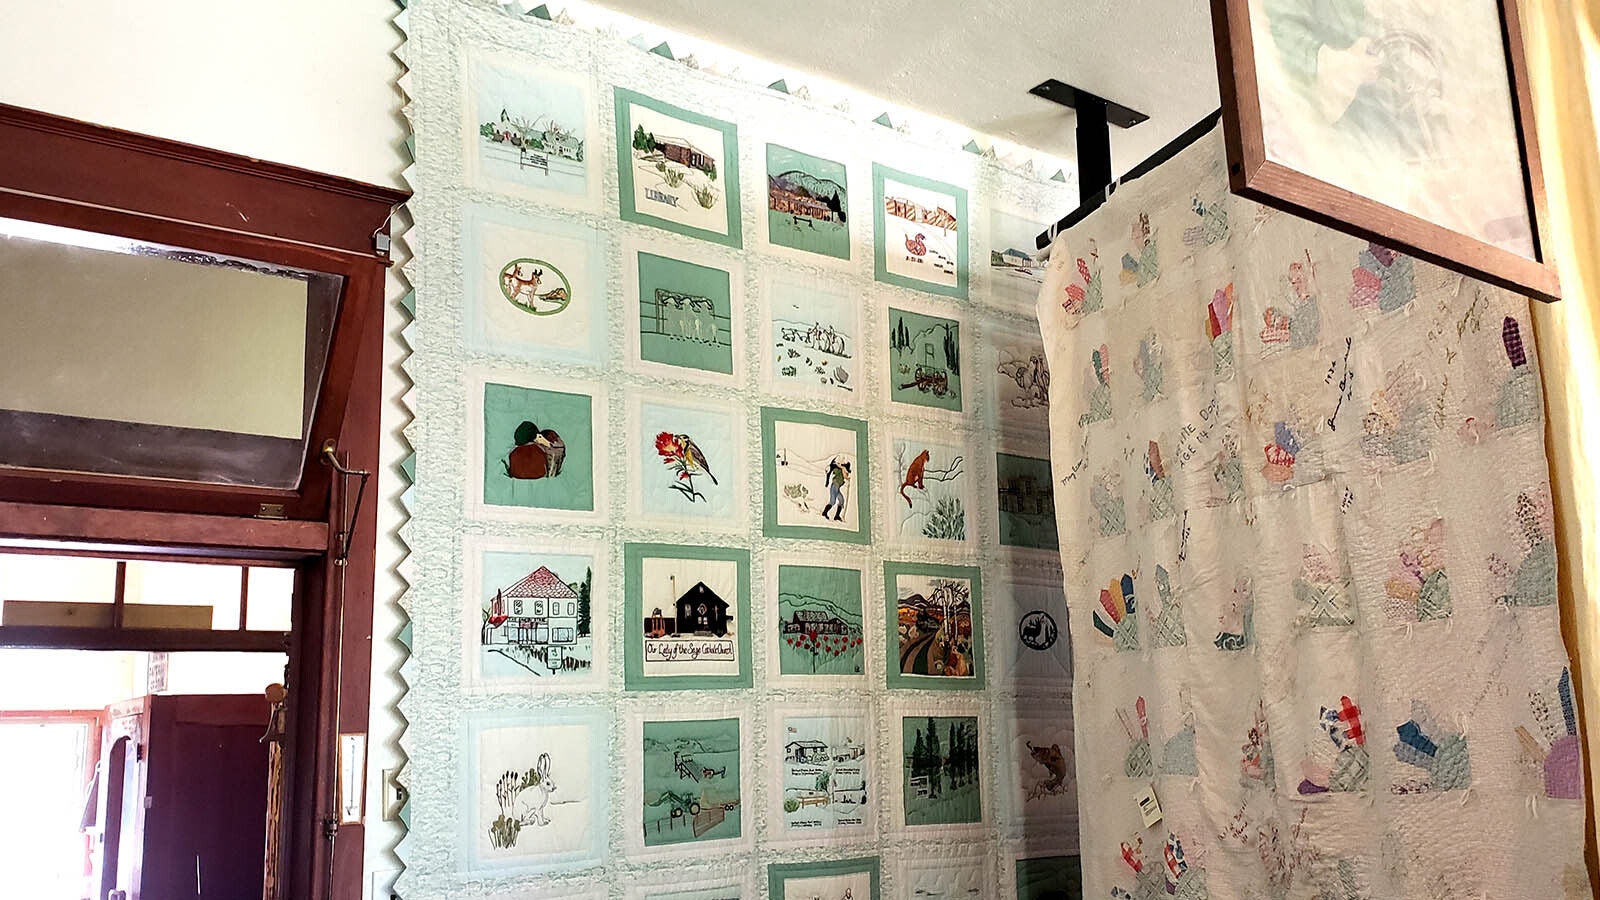 This quilt showcases the buildings and history of the Little Snake River Valley.